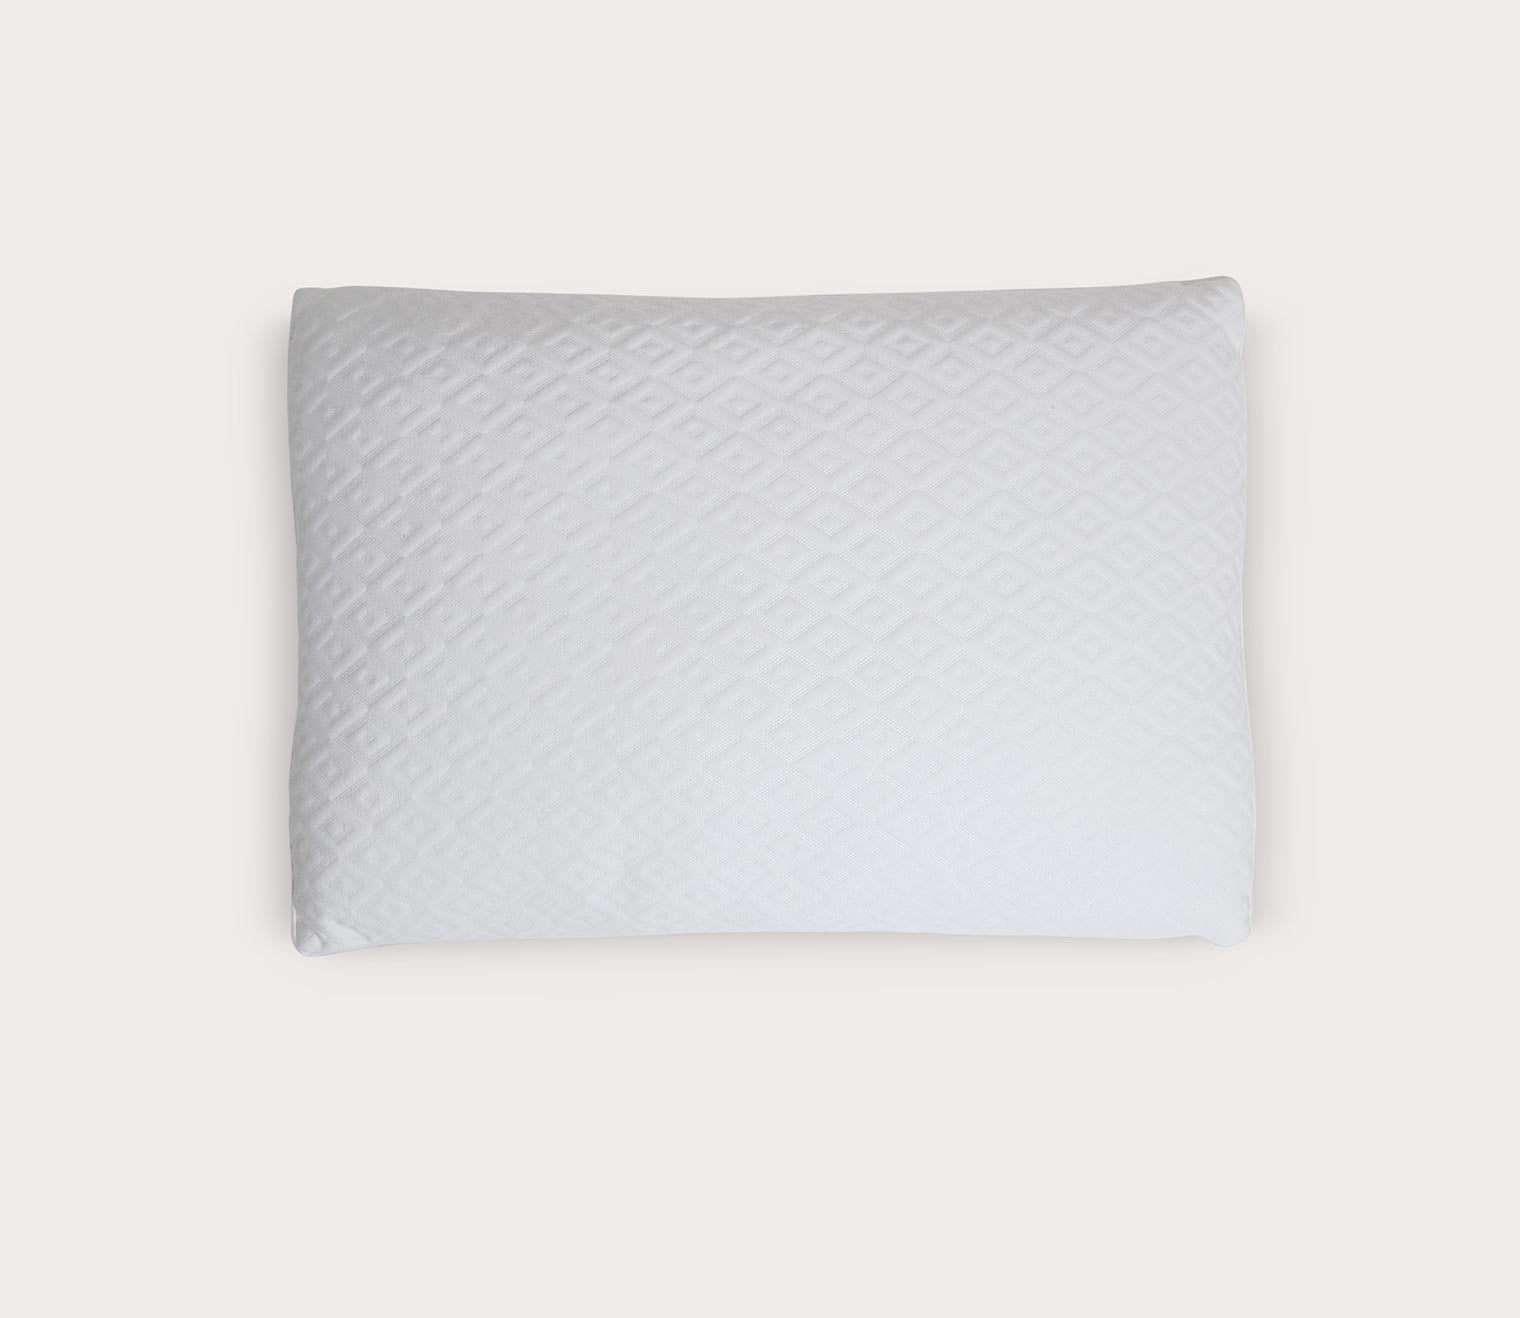 Active Dry Dual Layer Memory Foam Pillow by Viscosoft